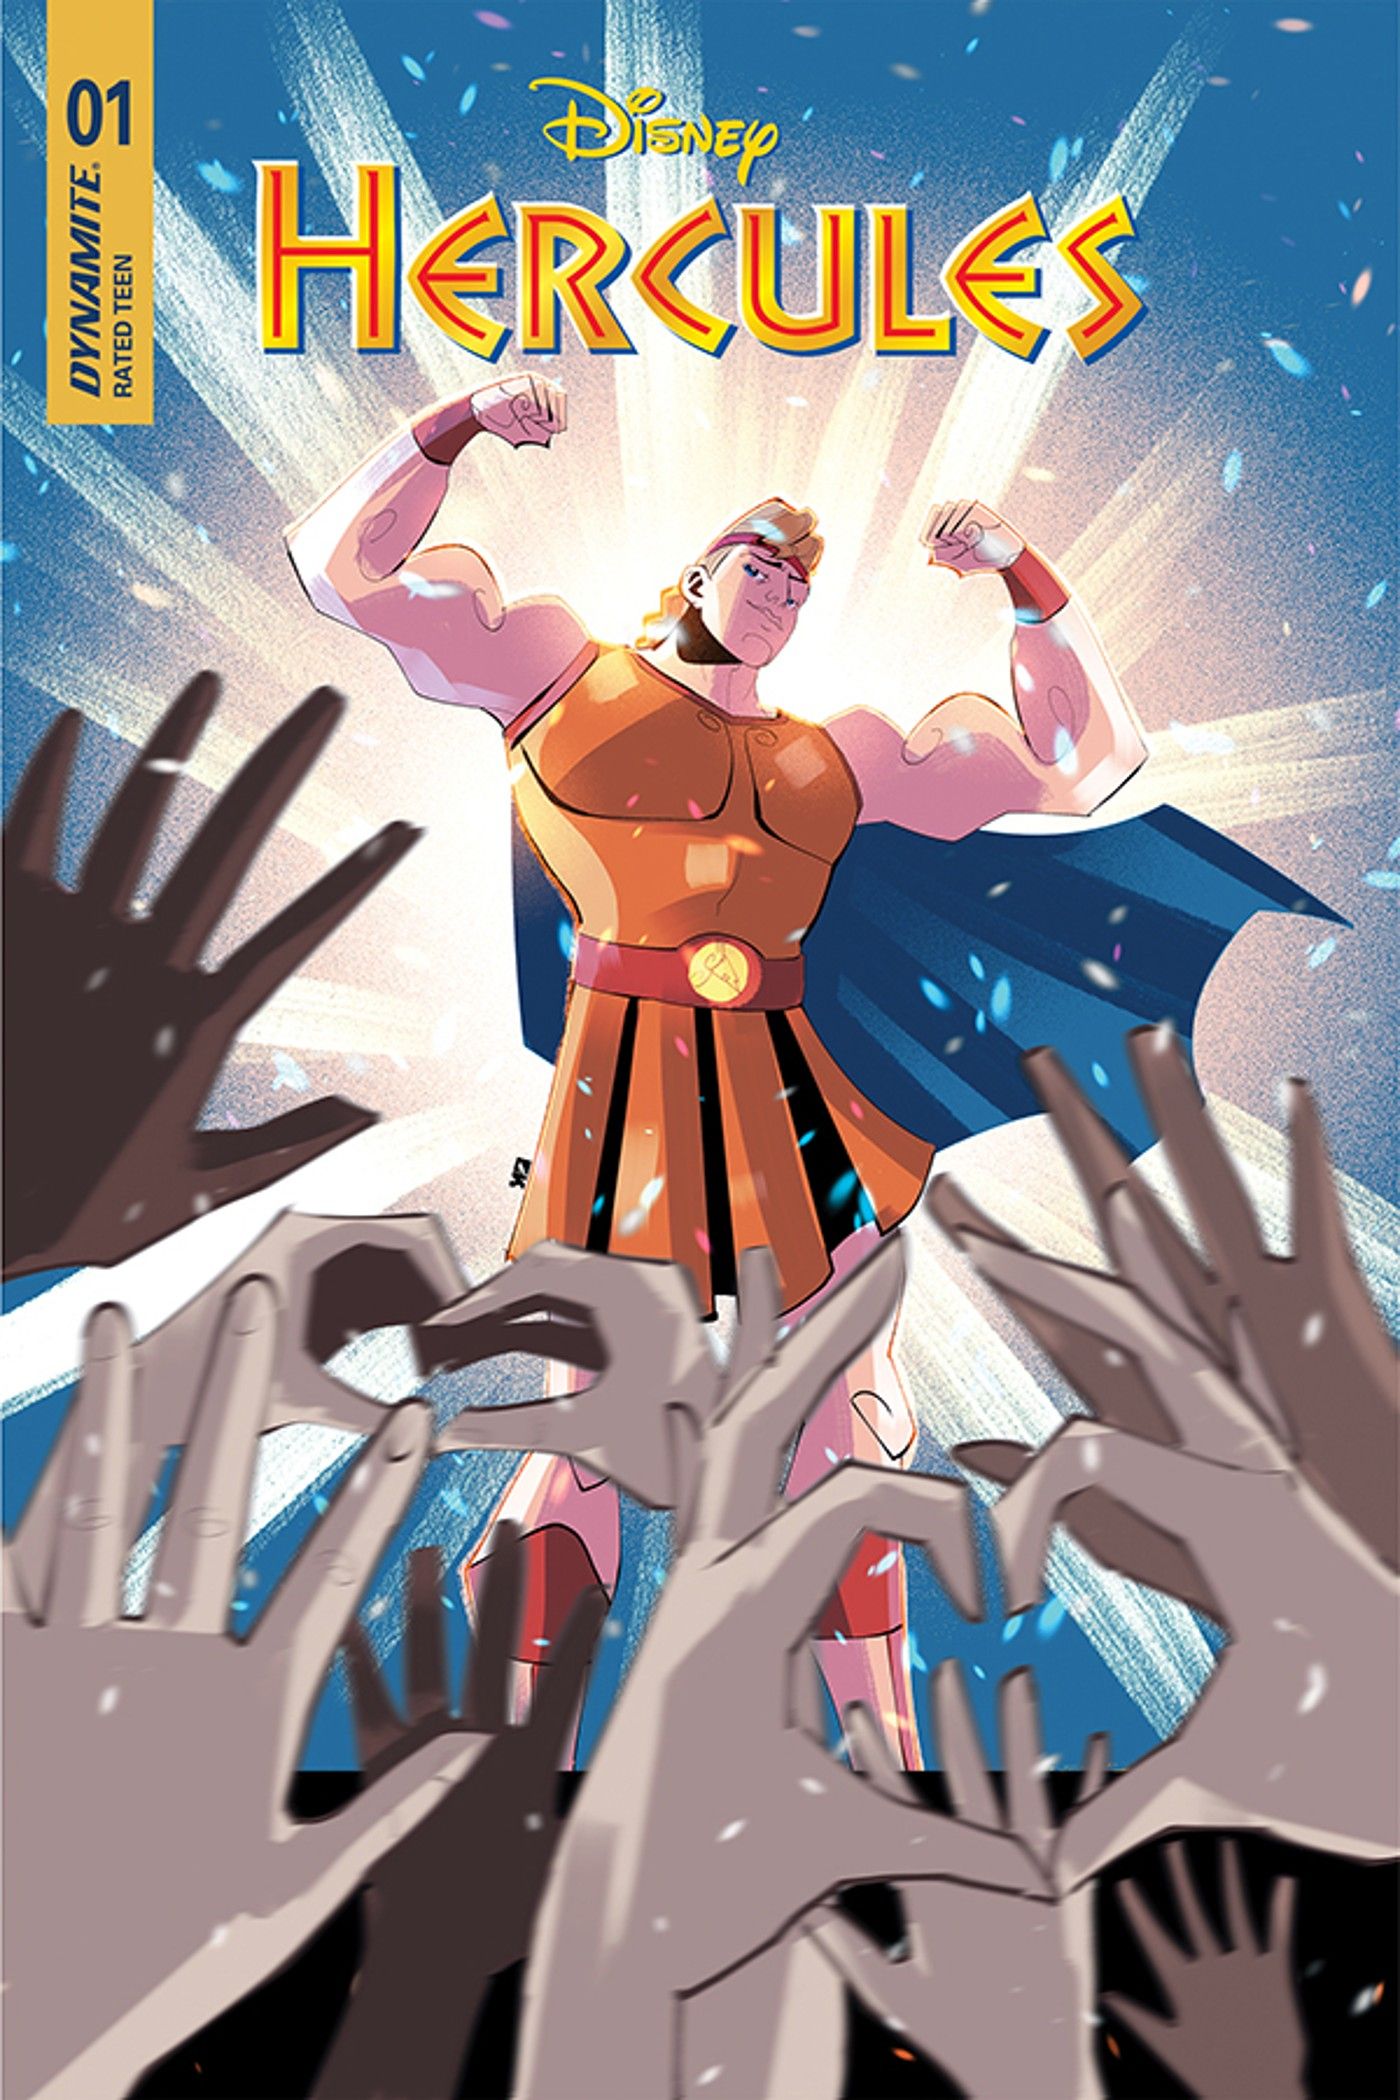 Disney’s Hercules Is Getting A Comic Book Sequel From Dynamite Comics